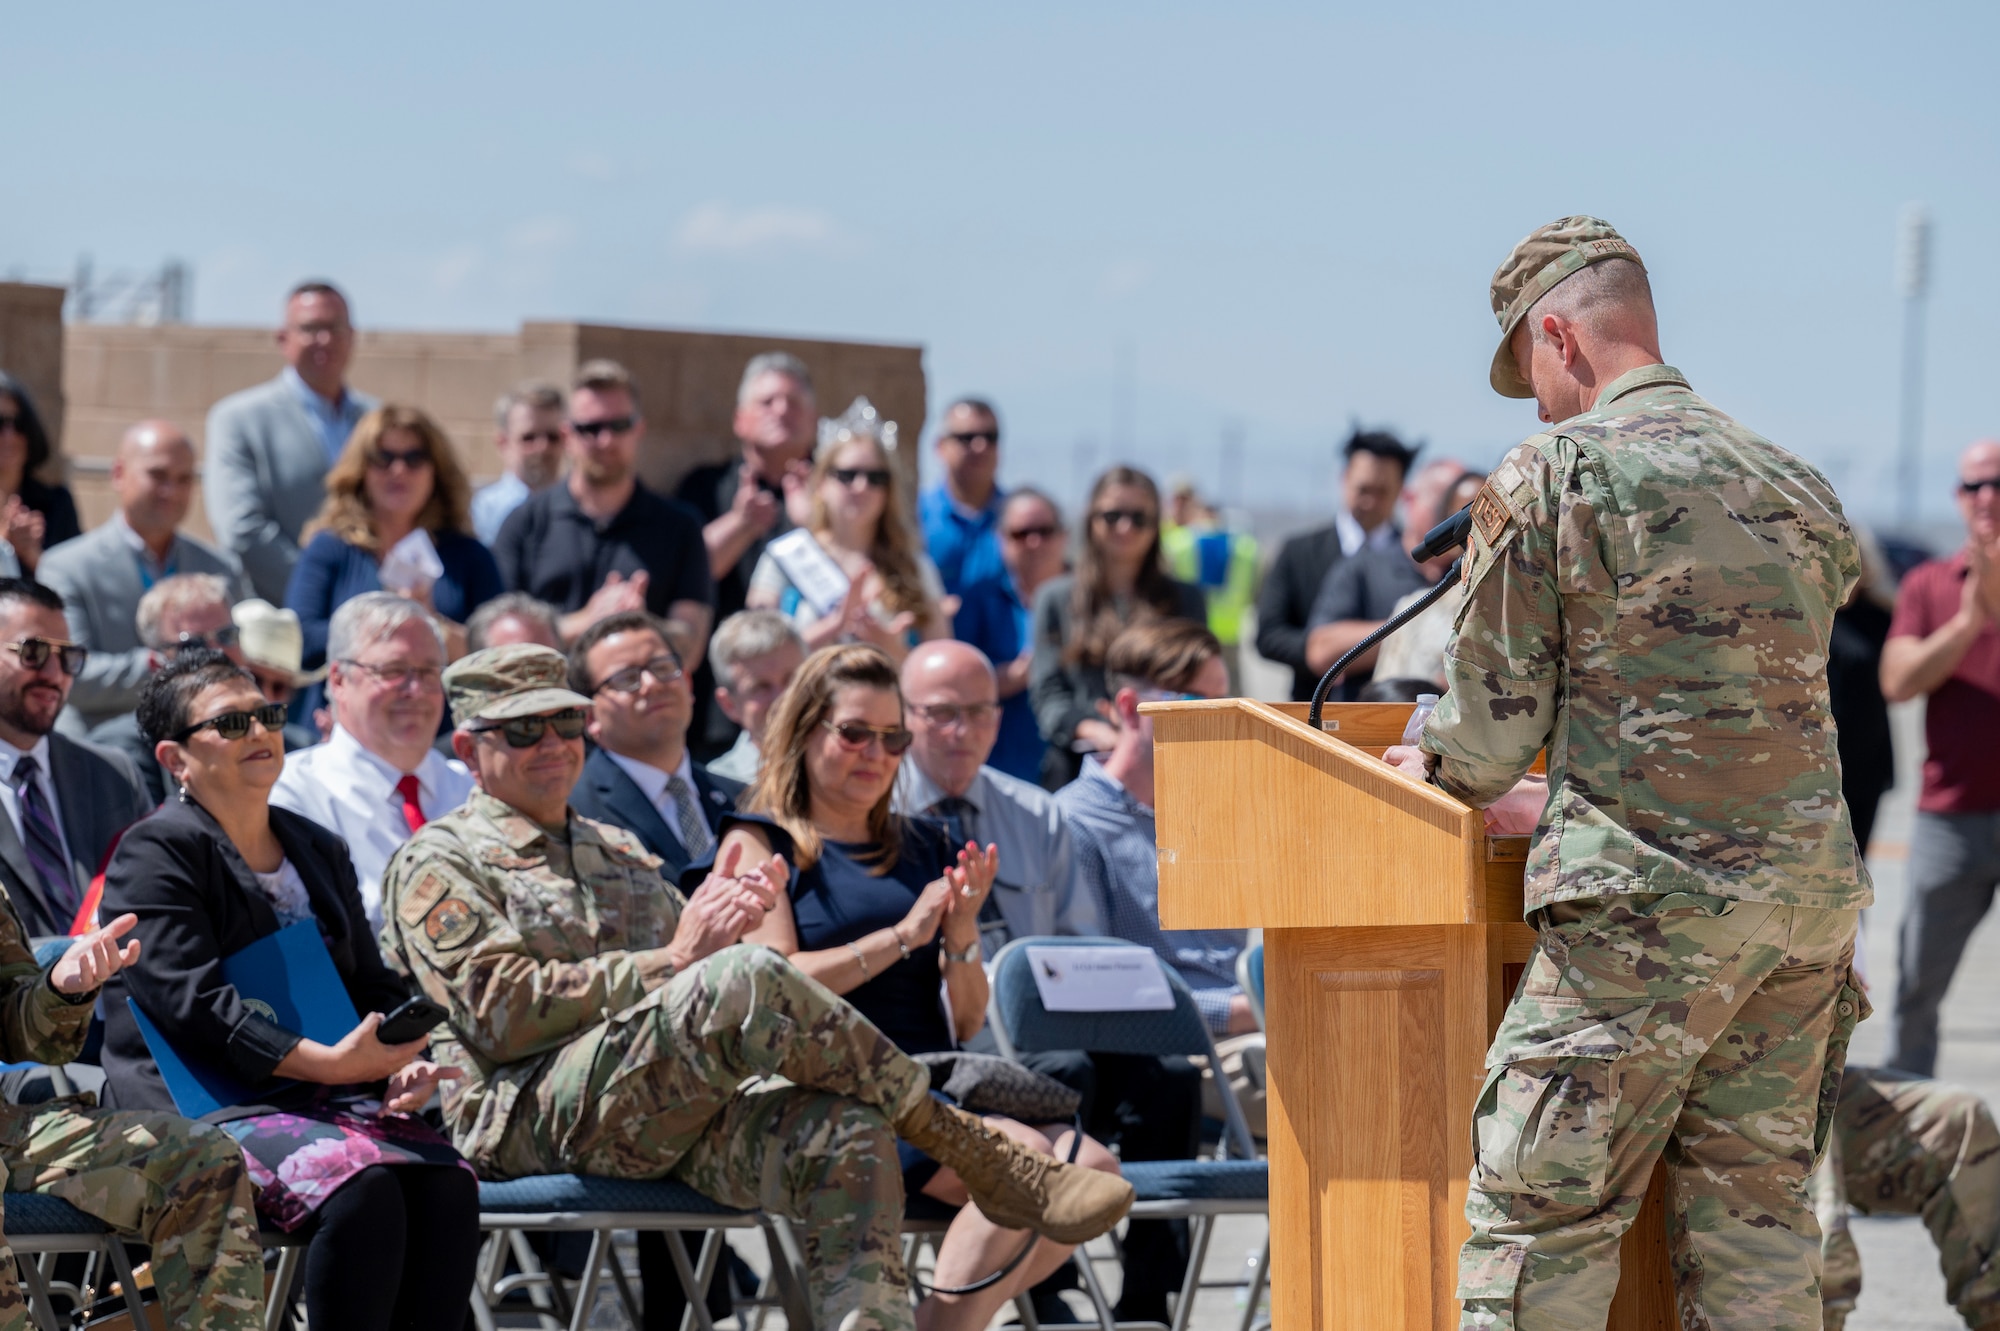 Lt. Col. James Petersen, 445 Test Squadron commander, gives a speech at the Digital Test and Training Range Facility Ribbon-Cutting Ceremony at Edwards Air Force Base, California, May 8, 2023. The mission 445 TS will begin performing at the DTTR will revolutionize test and training across the electromagnetic spectrum for multi-domain, multi-platform, system-of-systems scenarios. (U.S. Air Force Photo/Tech. Sgt. Robert Cloys)